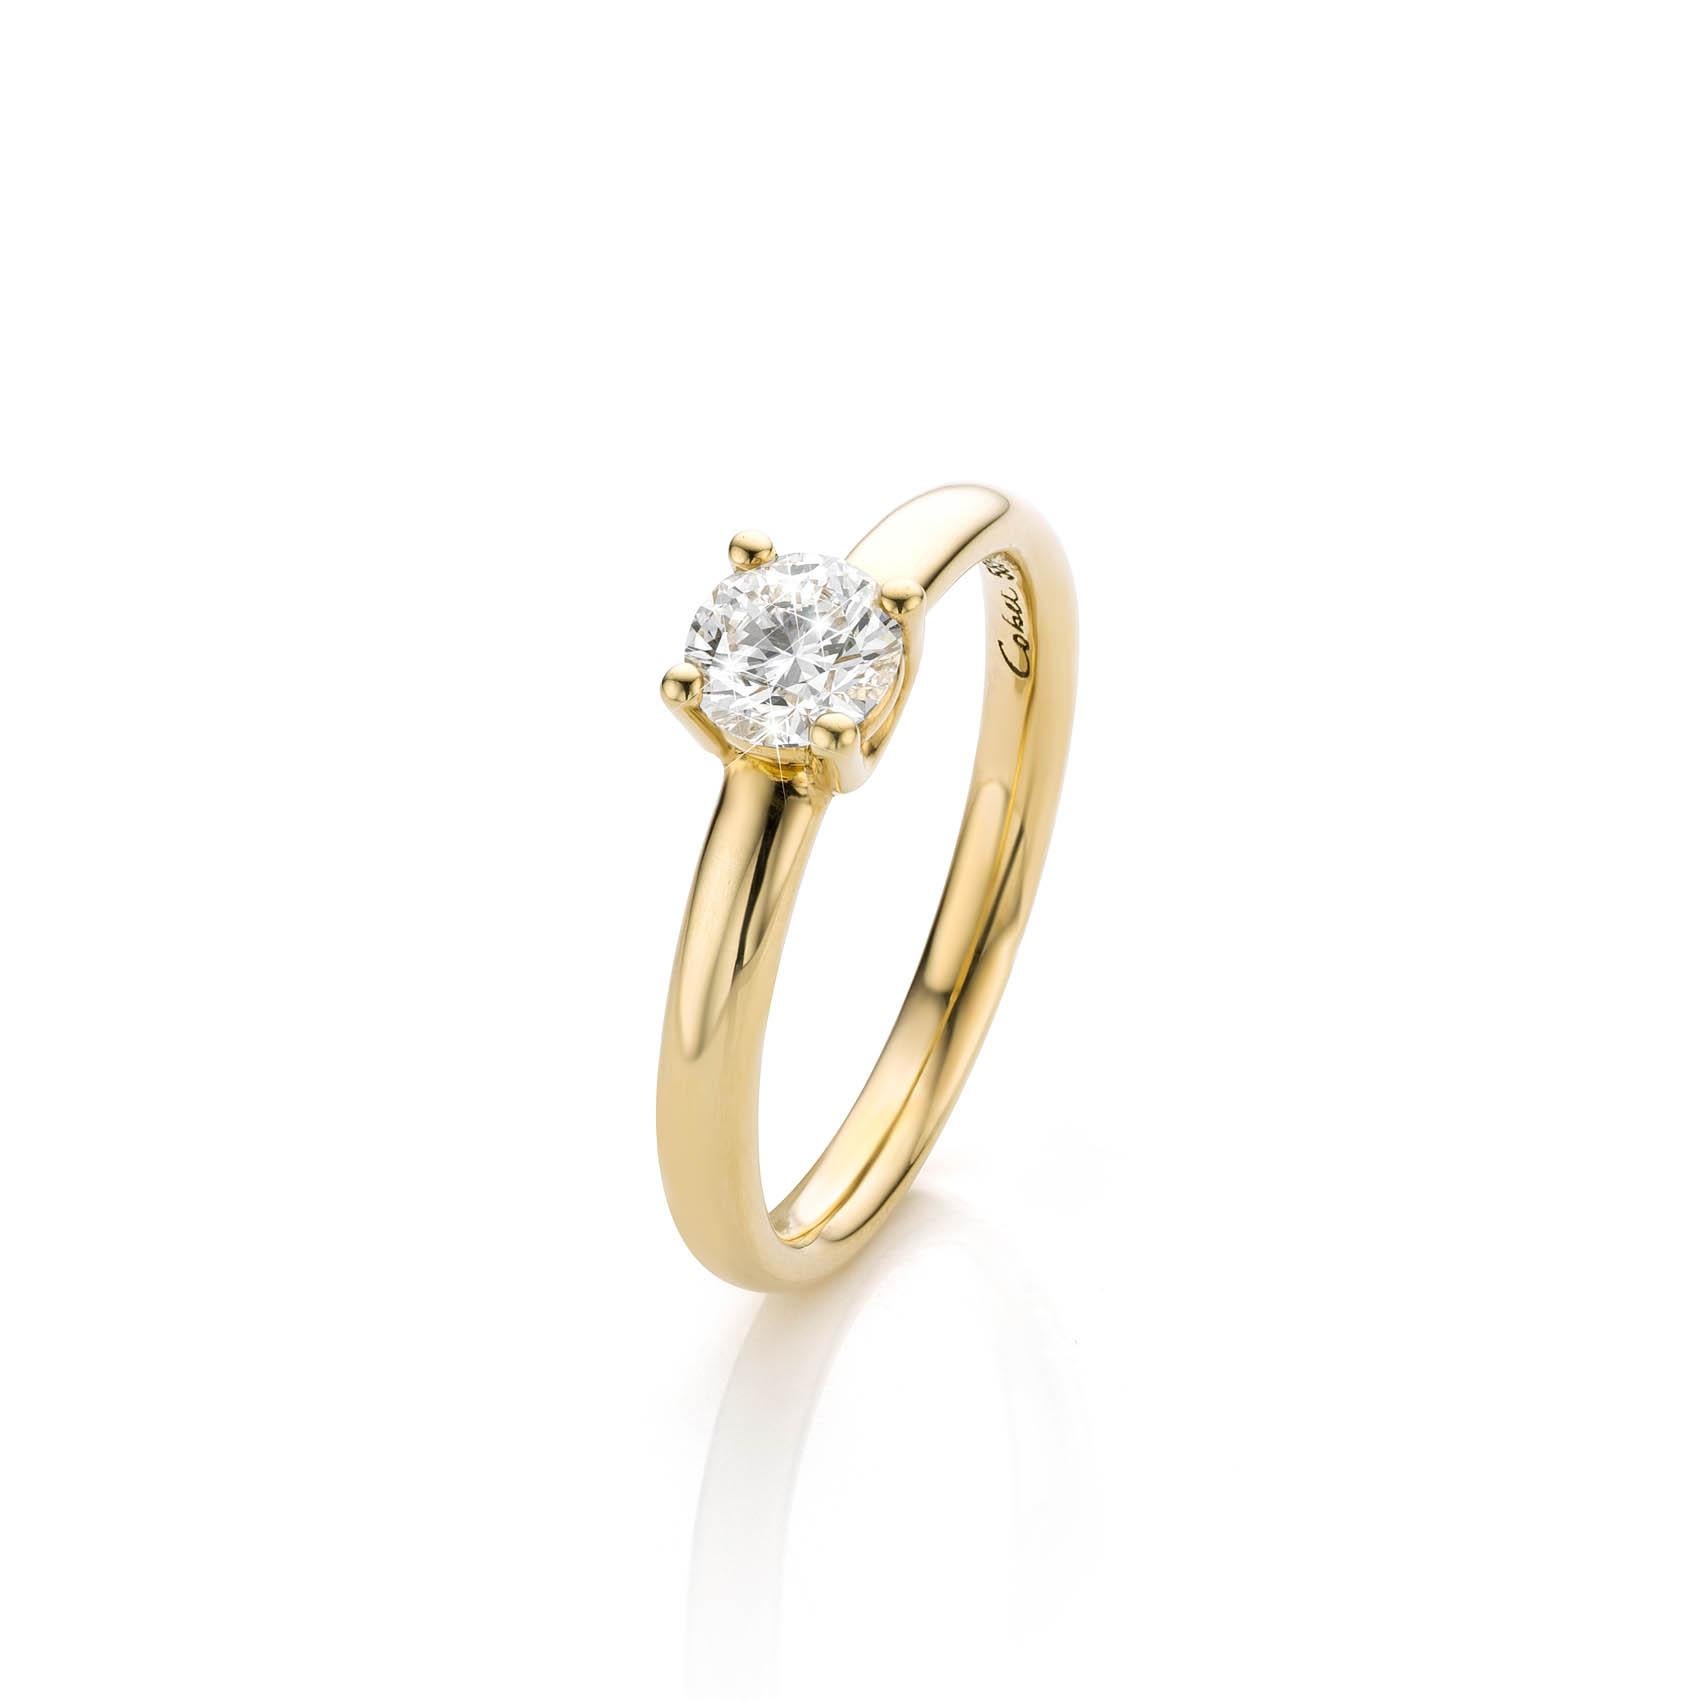 This is a 14 Carat yellow gold ring with a 0,50 ct. Brilliant-cut Diamond.
A very unique piece because of his beautiful simplicity.
Cober designs exclusive wedding rings, jewels and watches, all of them made by hand.
“The most distinctive jewellery